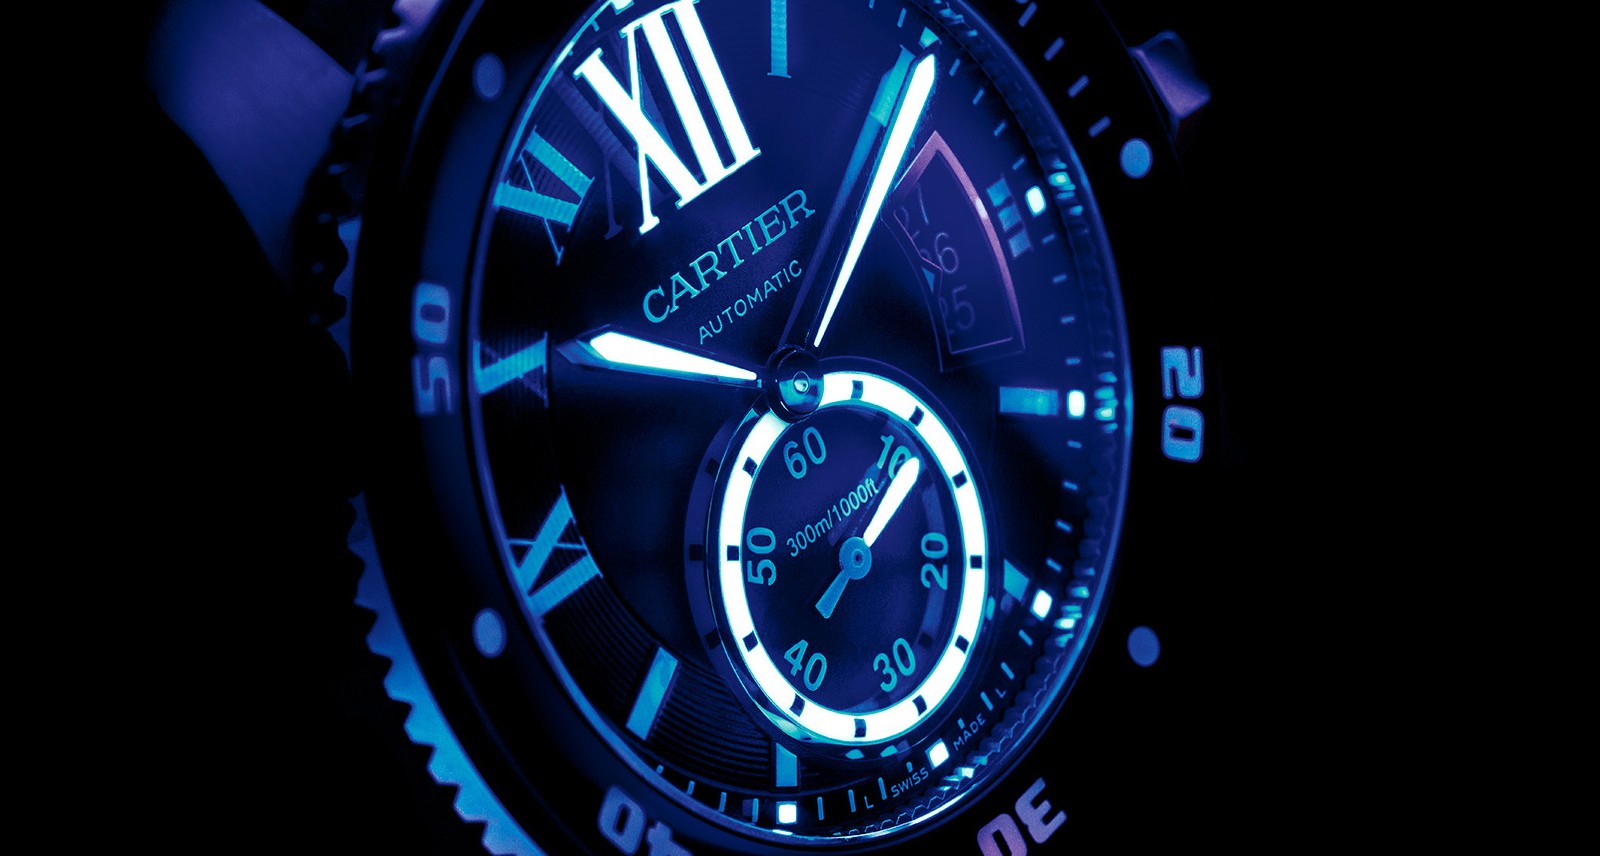 7 Luminescent Watches That'll Keep the 